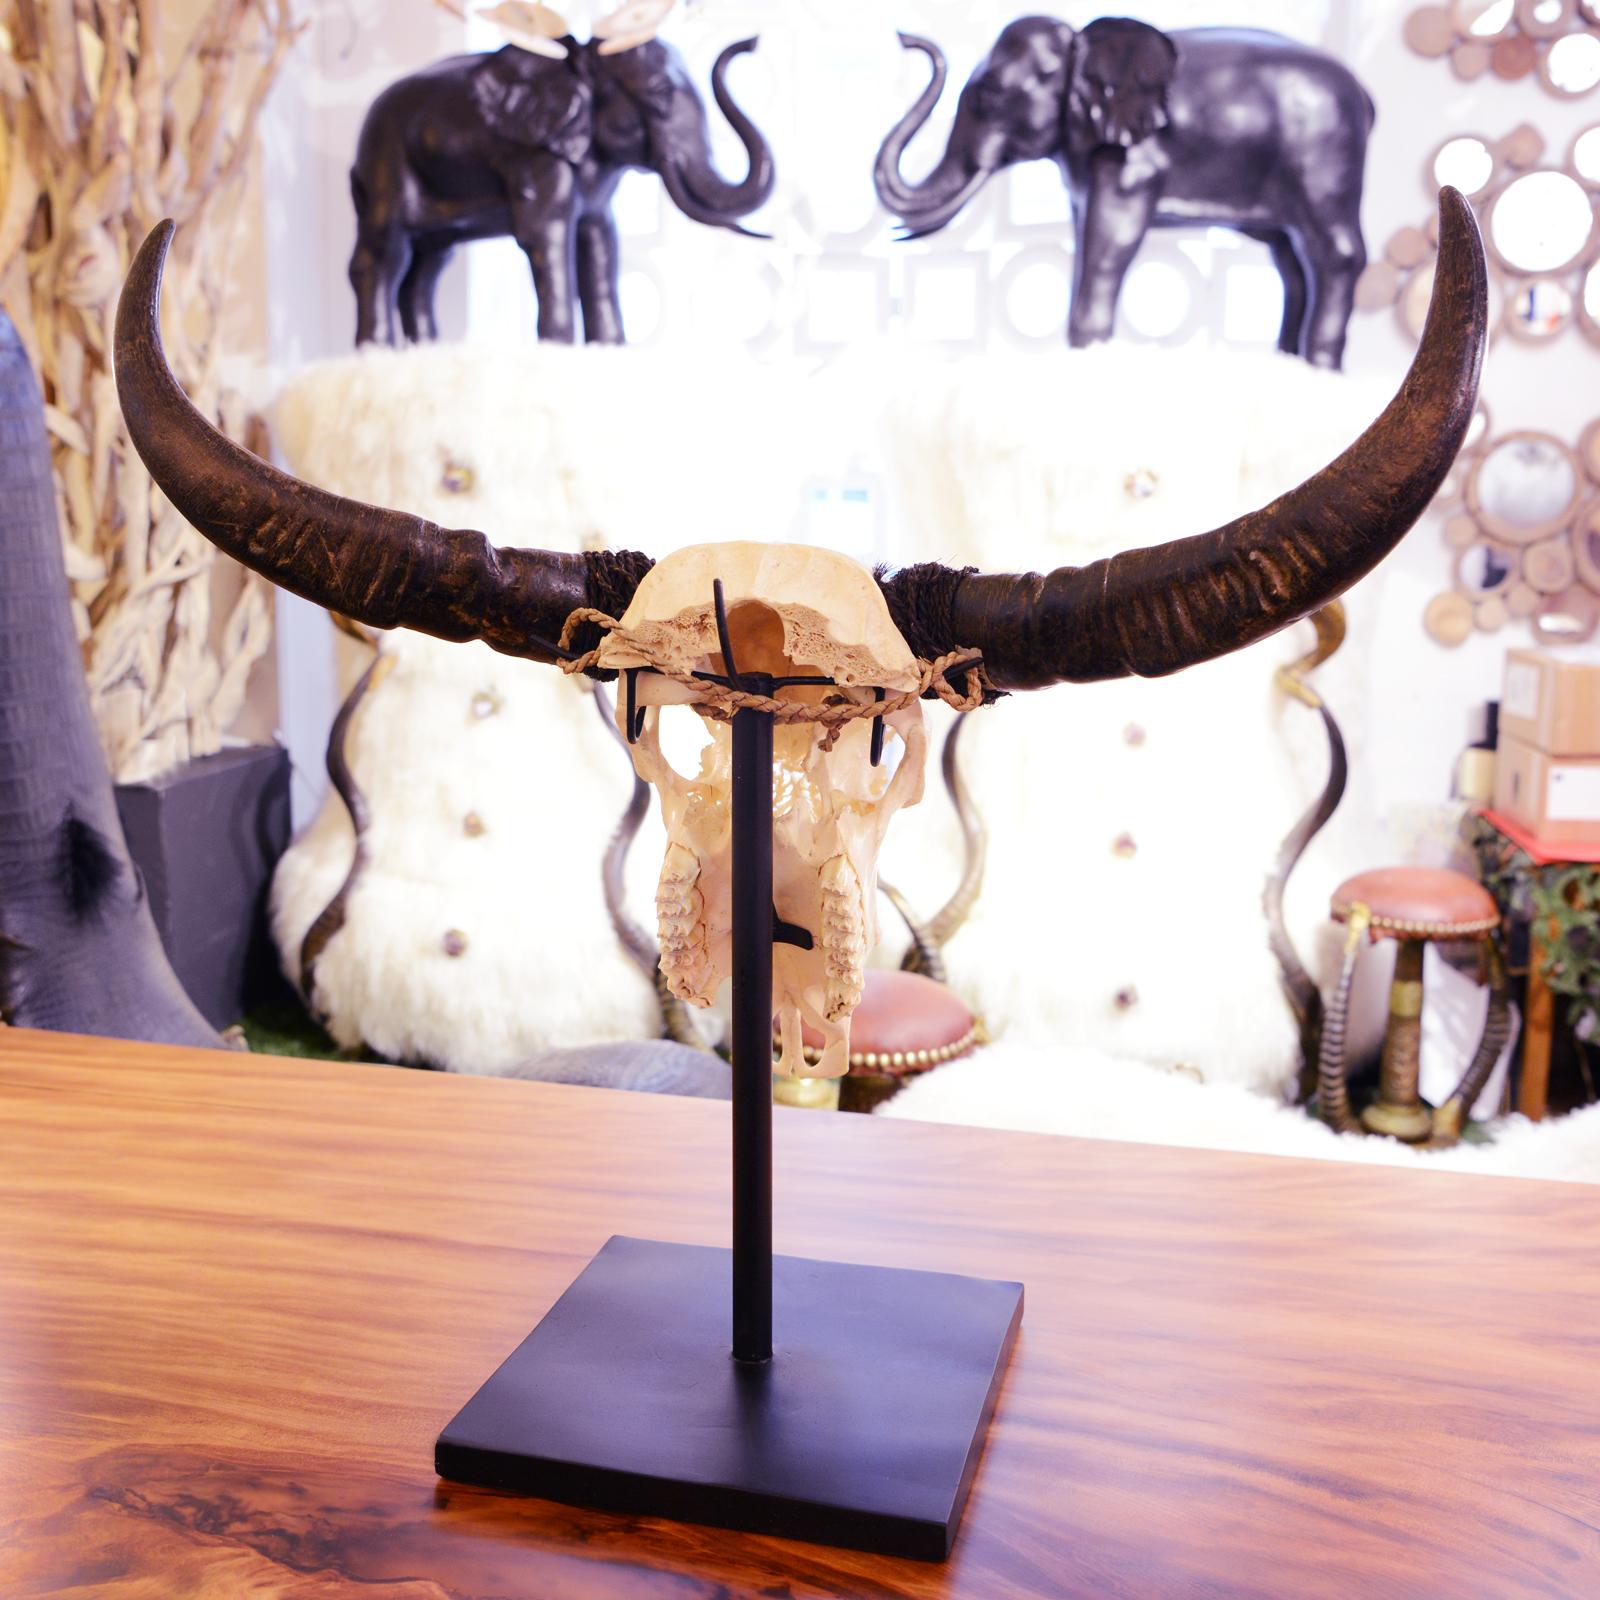 Hand-Crafted Buffalo Skull Hand-Carved Flower Sculpture